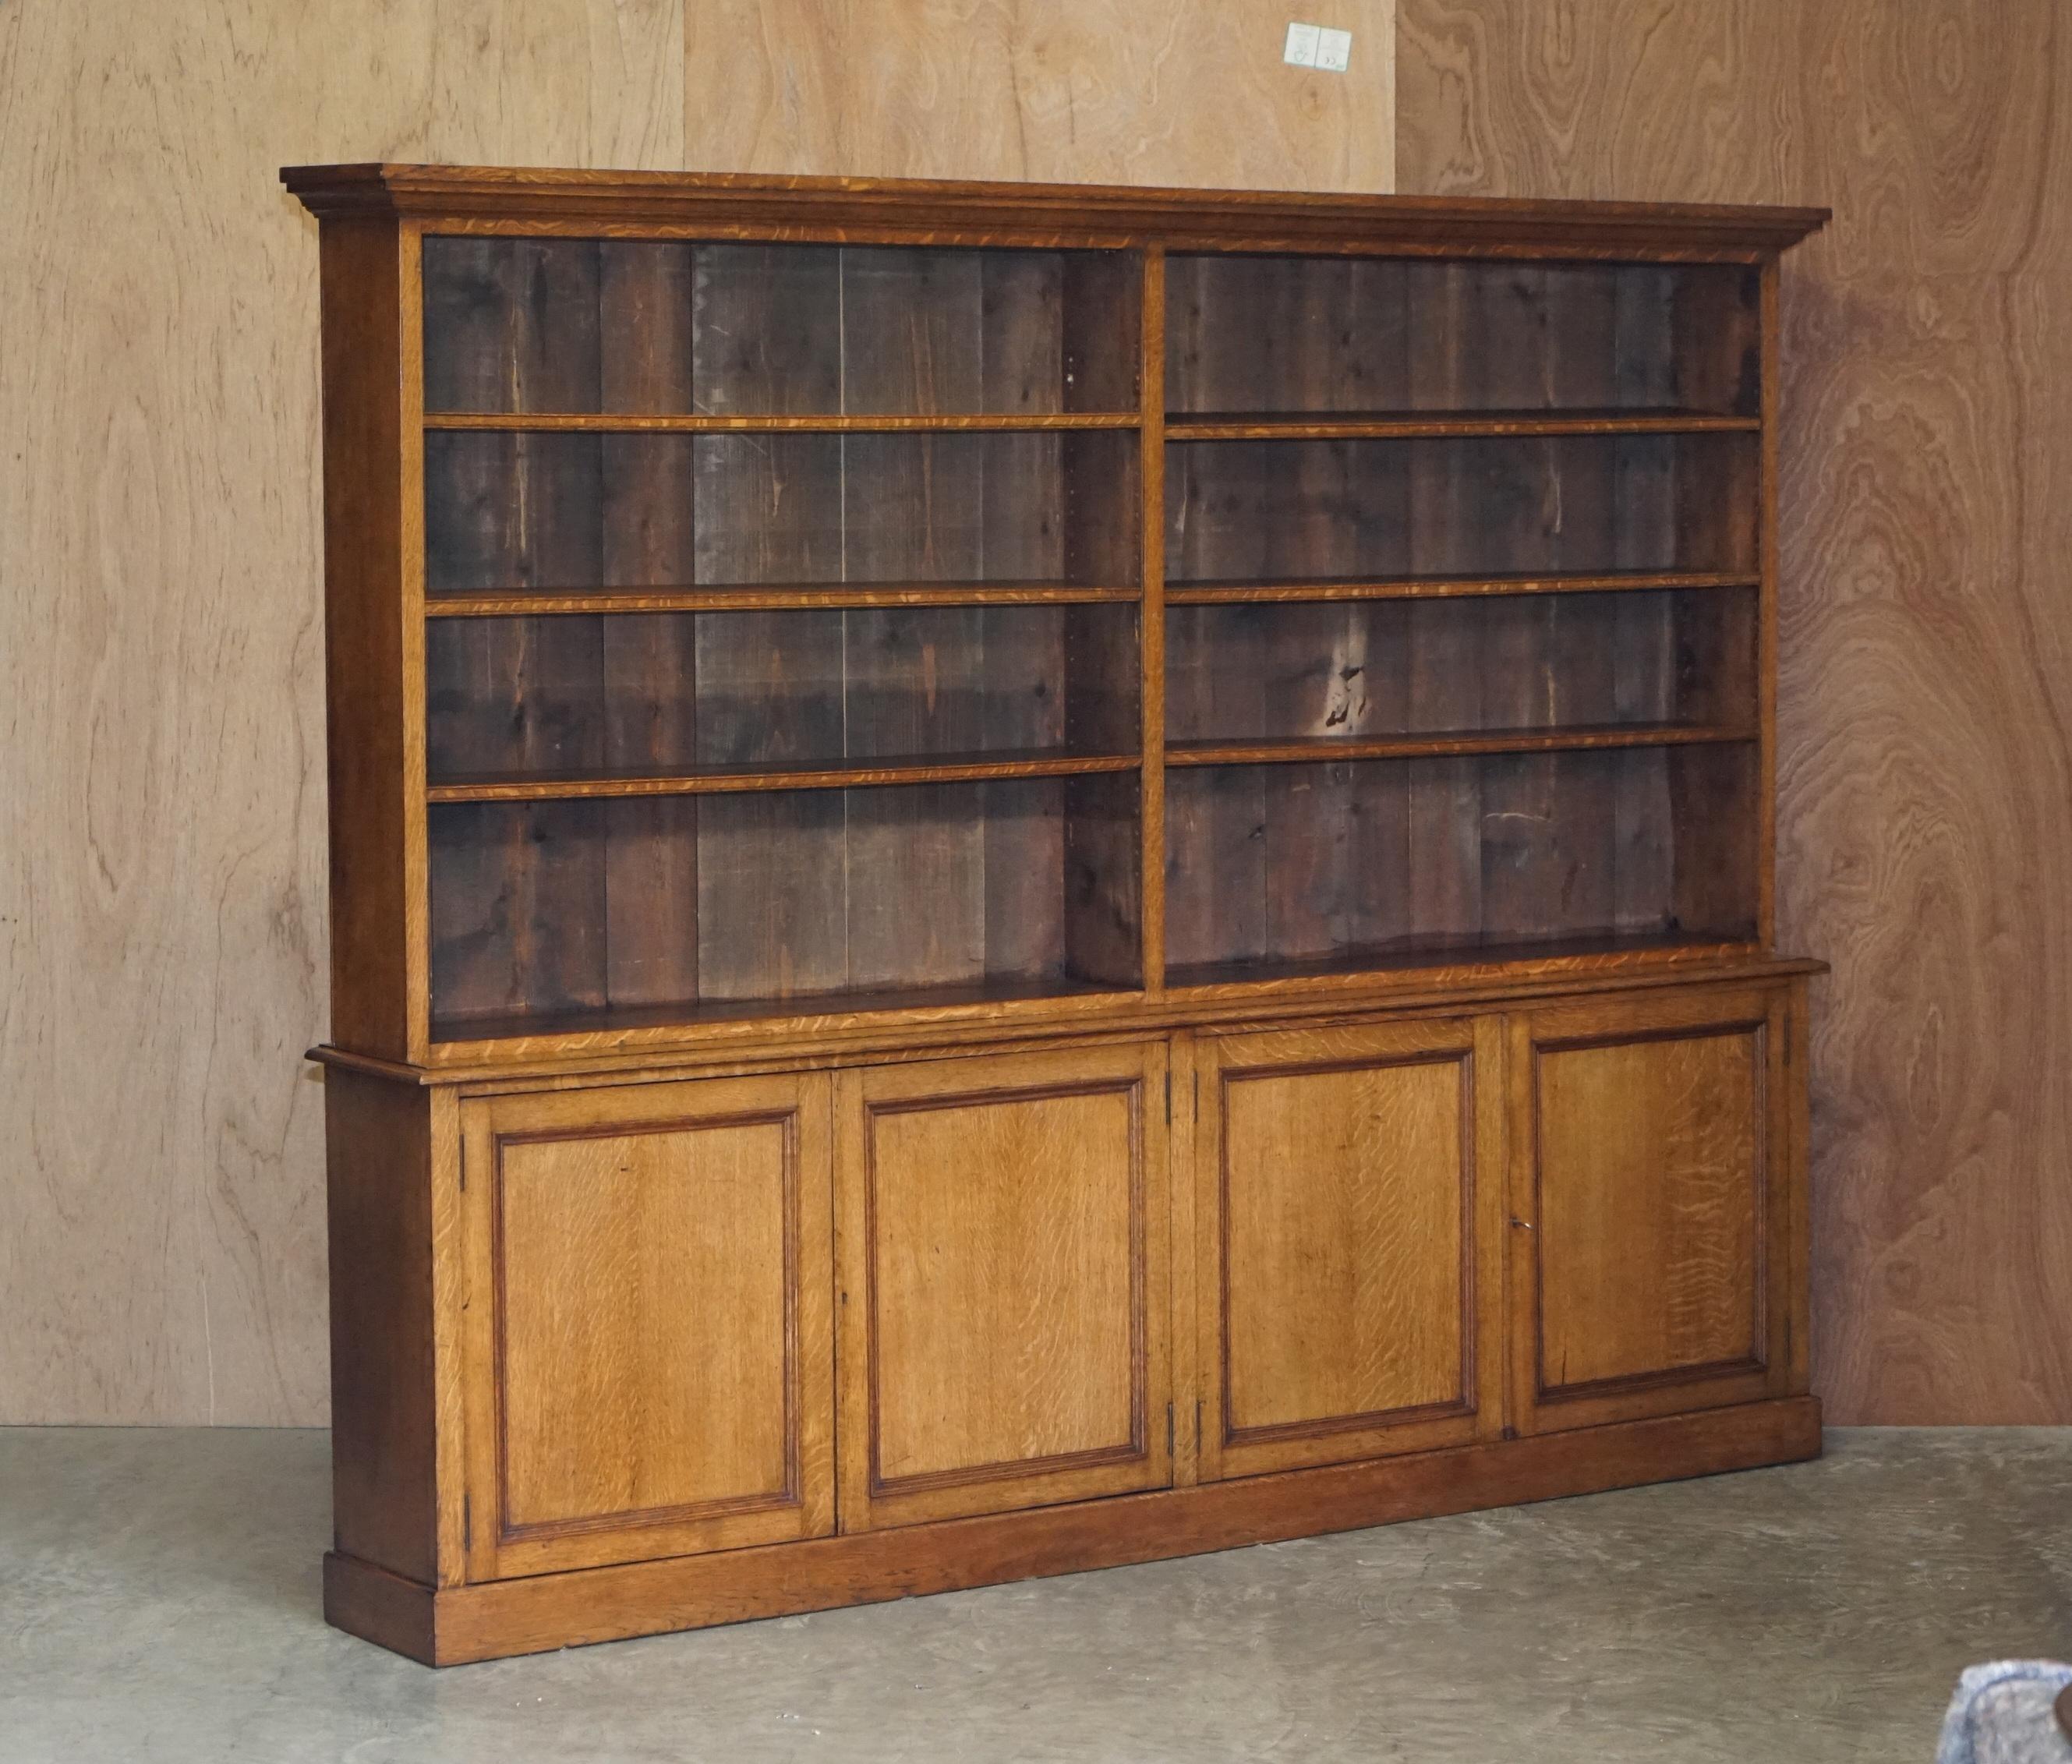 We are delighted to offer for sale this stunning hand made in England oak library bookcase with cupboard base and original key

A very good looking well made and decorative piece of Victorian town house furniture. This bookcase is English oak,